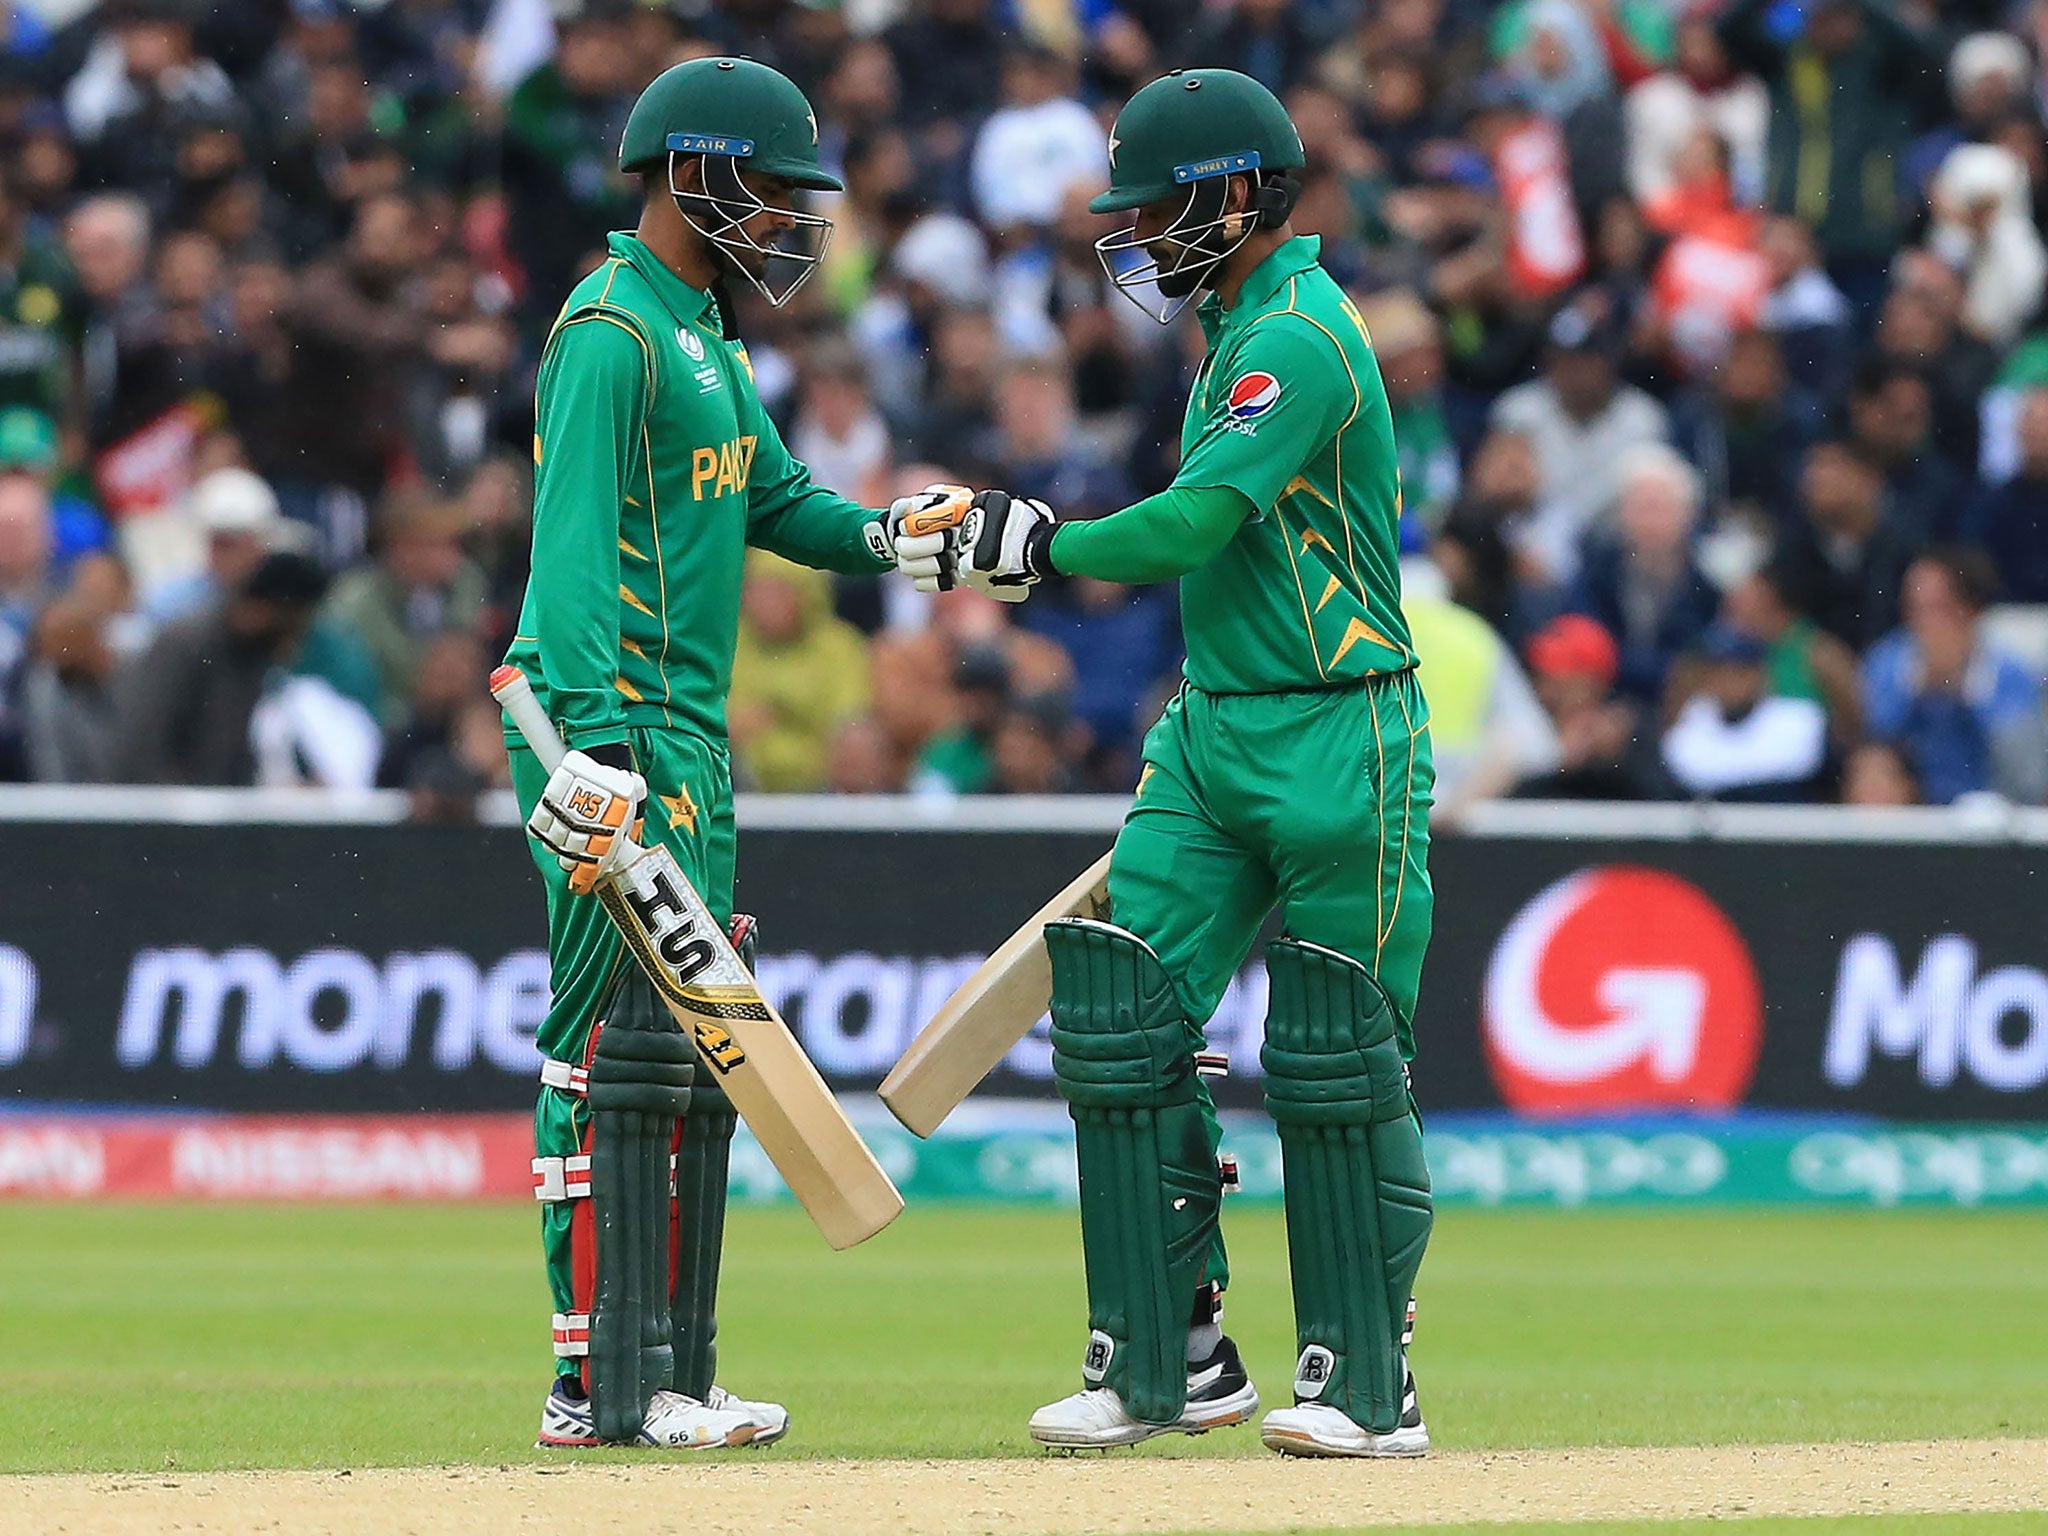 Pakistan beat South Africa by 19 runs on the DLS method